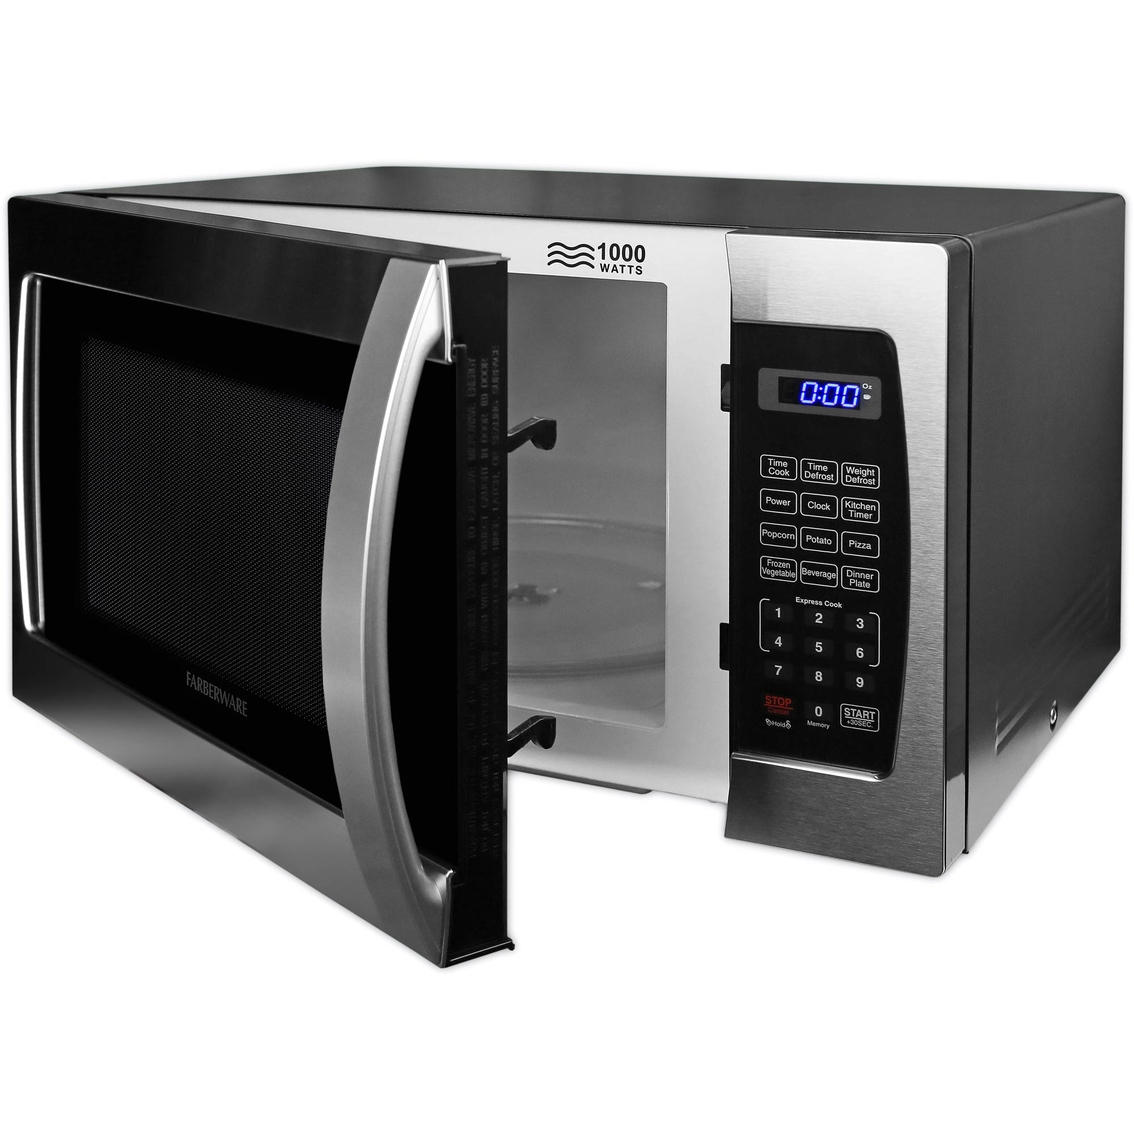 Farberware Professional 1.3 cu. ft. Microwave Oven - Image 4 of 8